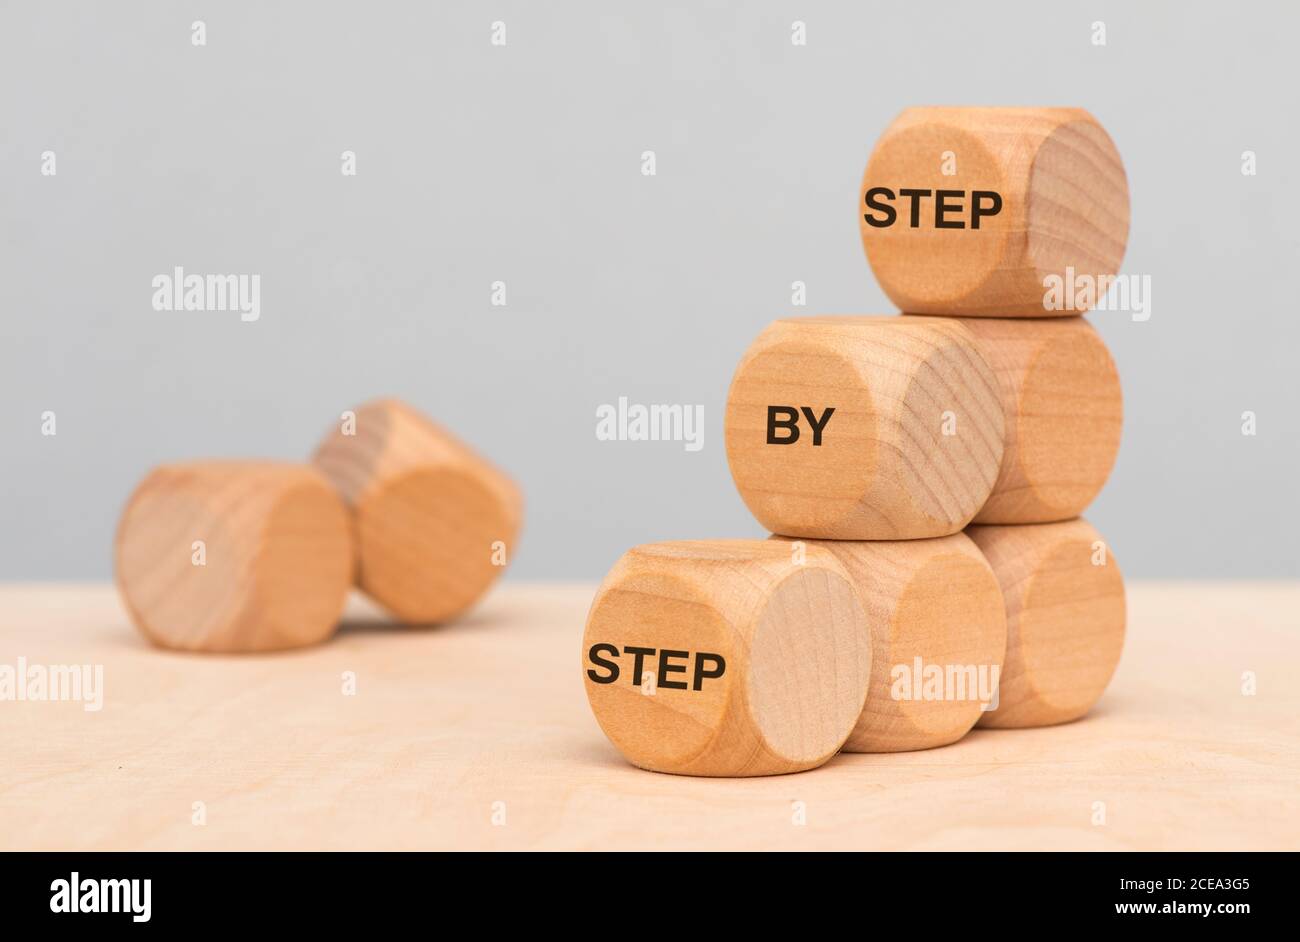 step by step printed on wooden cubes Stock Photo